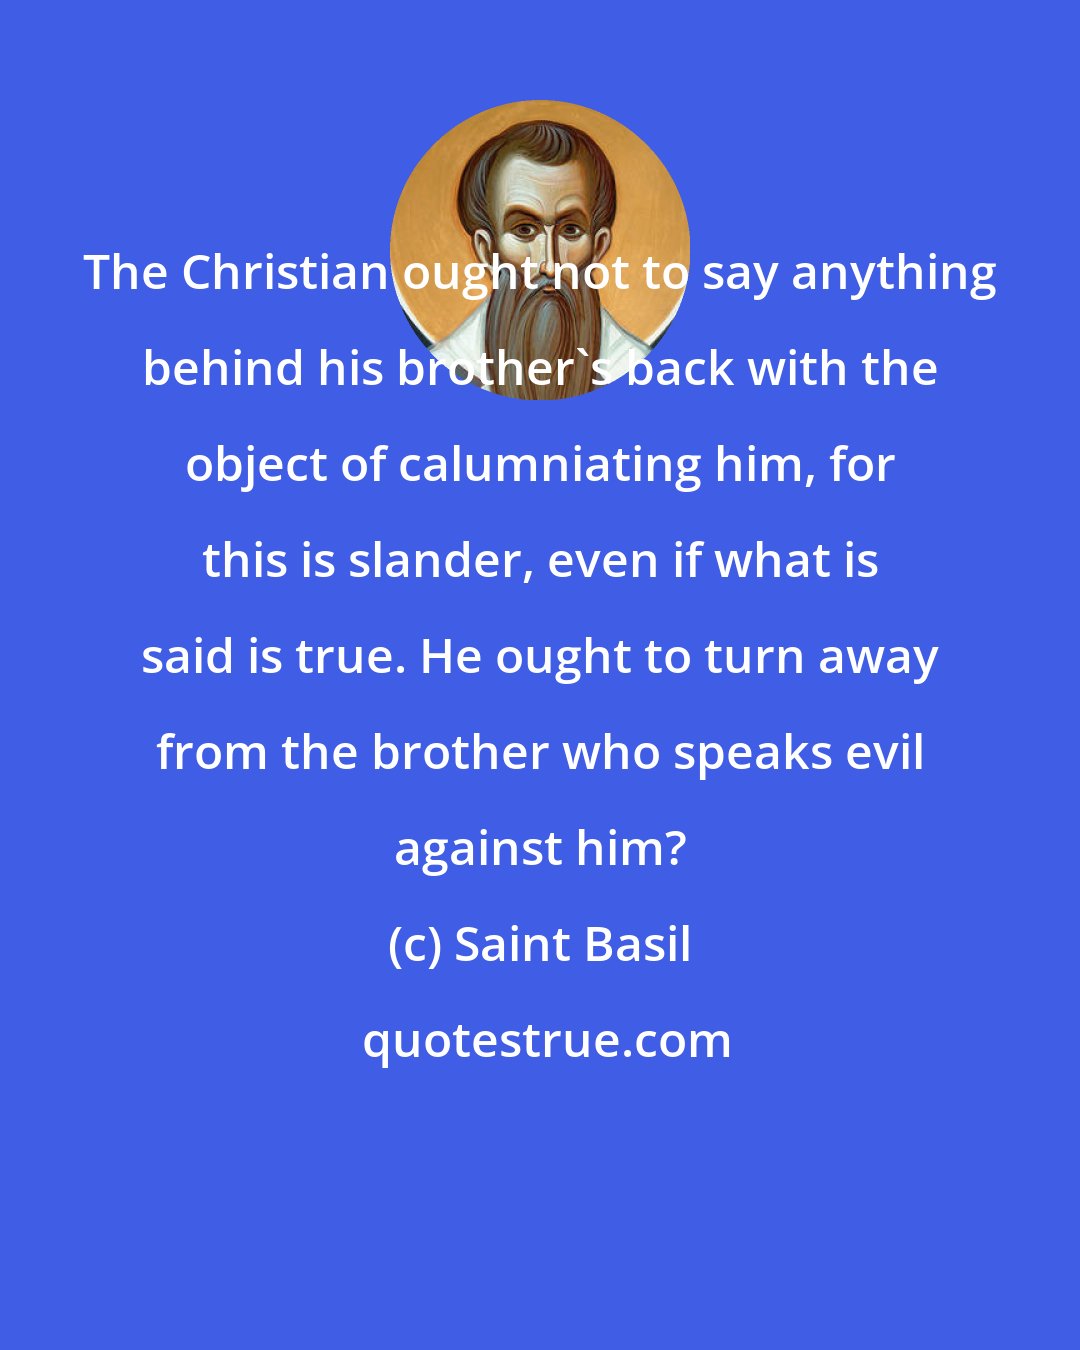 Saint Basil: The Christian ought not to say anything behind his brother's back with the object of calumniating him, for this is slander, even if what is said is true. He ought to turn away from the brother who speaks evil against him?